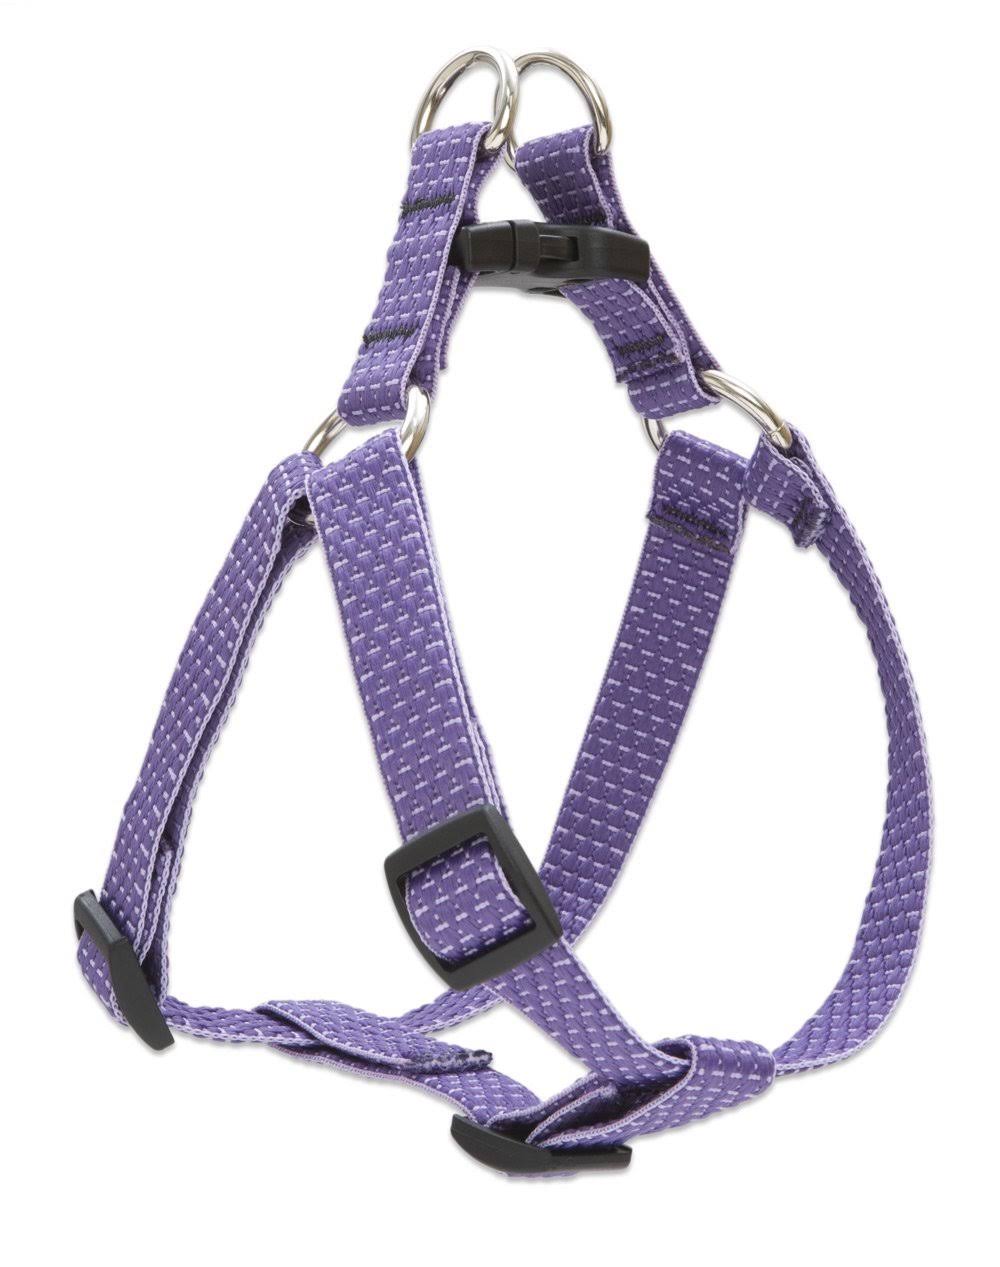 Lupine 36444 Eco Step In Small Dog Harness - Lilac, 3/4" x 15" to 21"